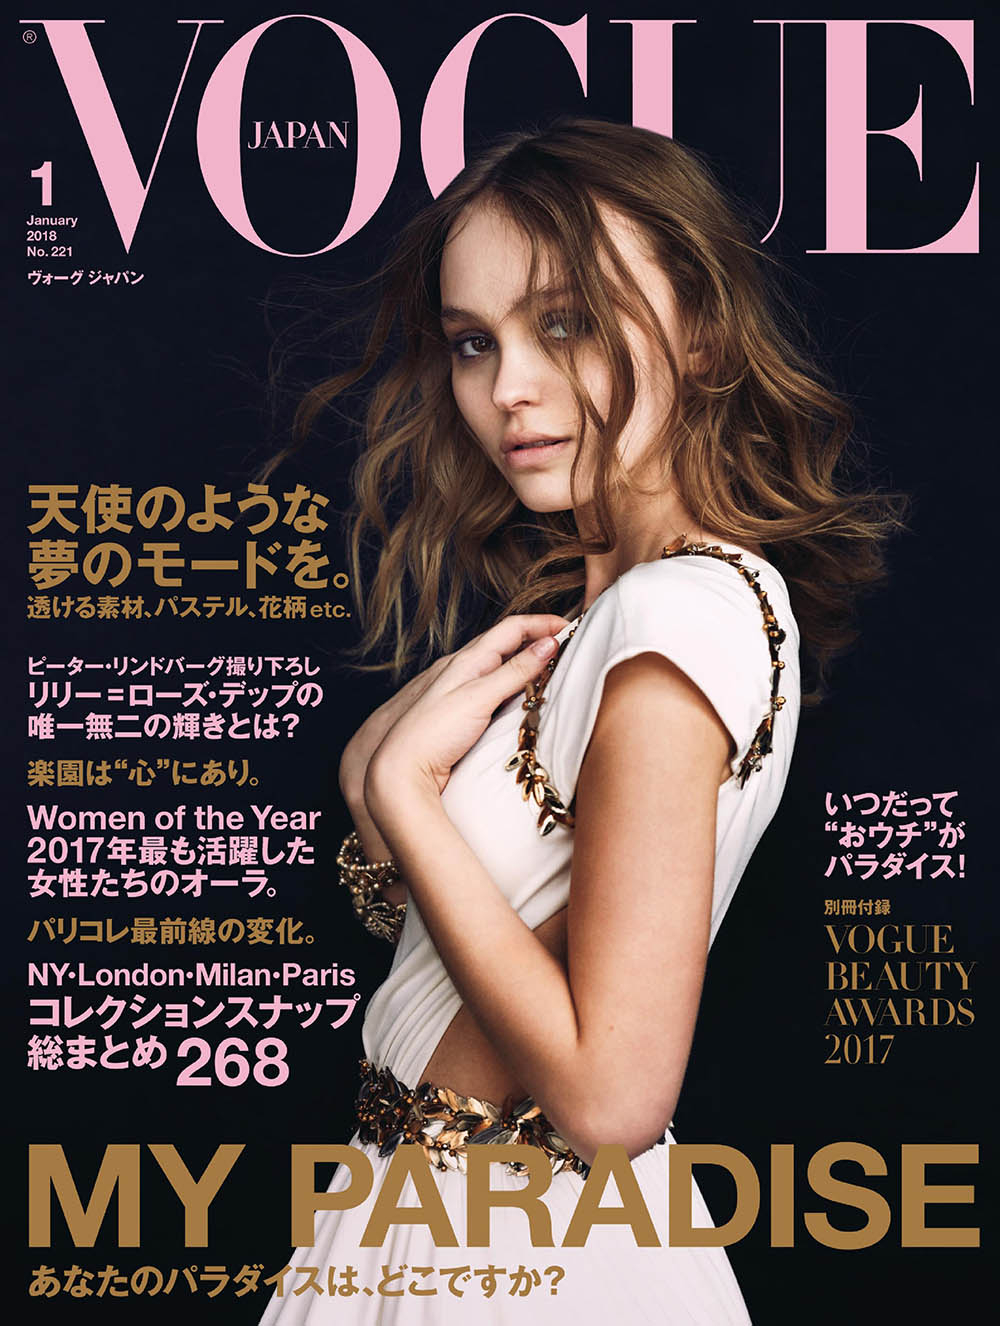 Lily-Rose-Depp-covers-Vogue-Japan-January-2018-by-Peter-Lindgergh-1-2.jpg